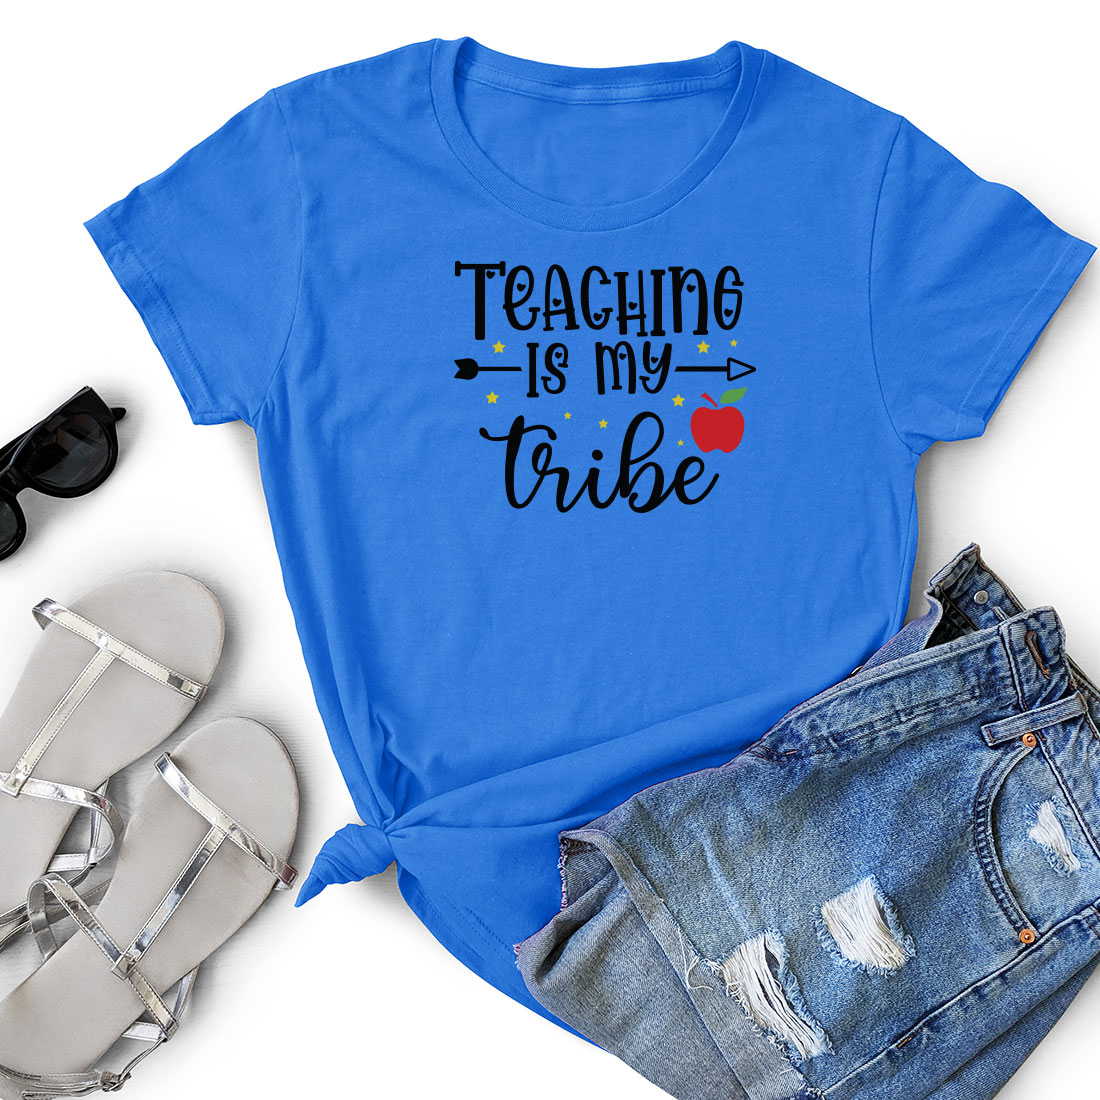 T - shirt that says teaching is my tribe.